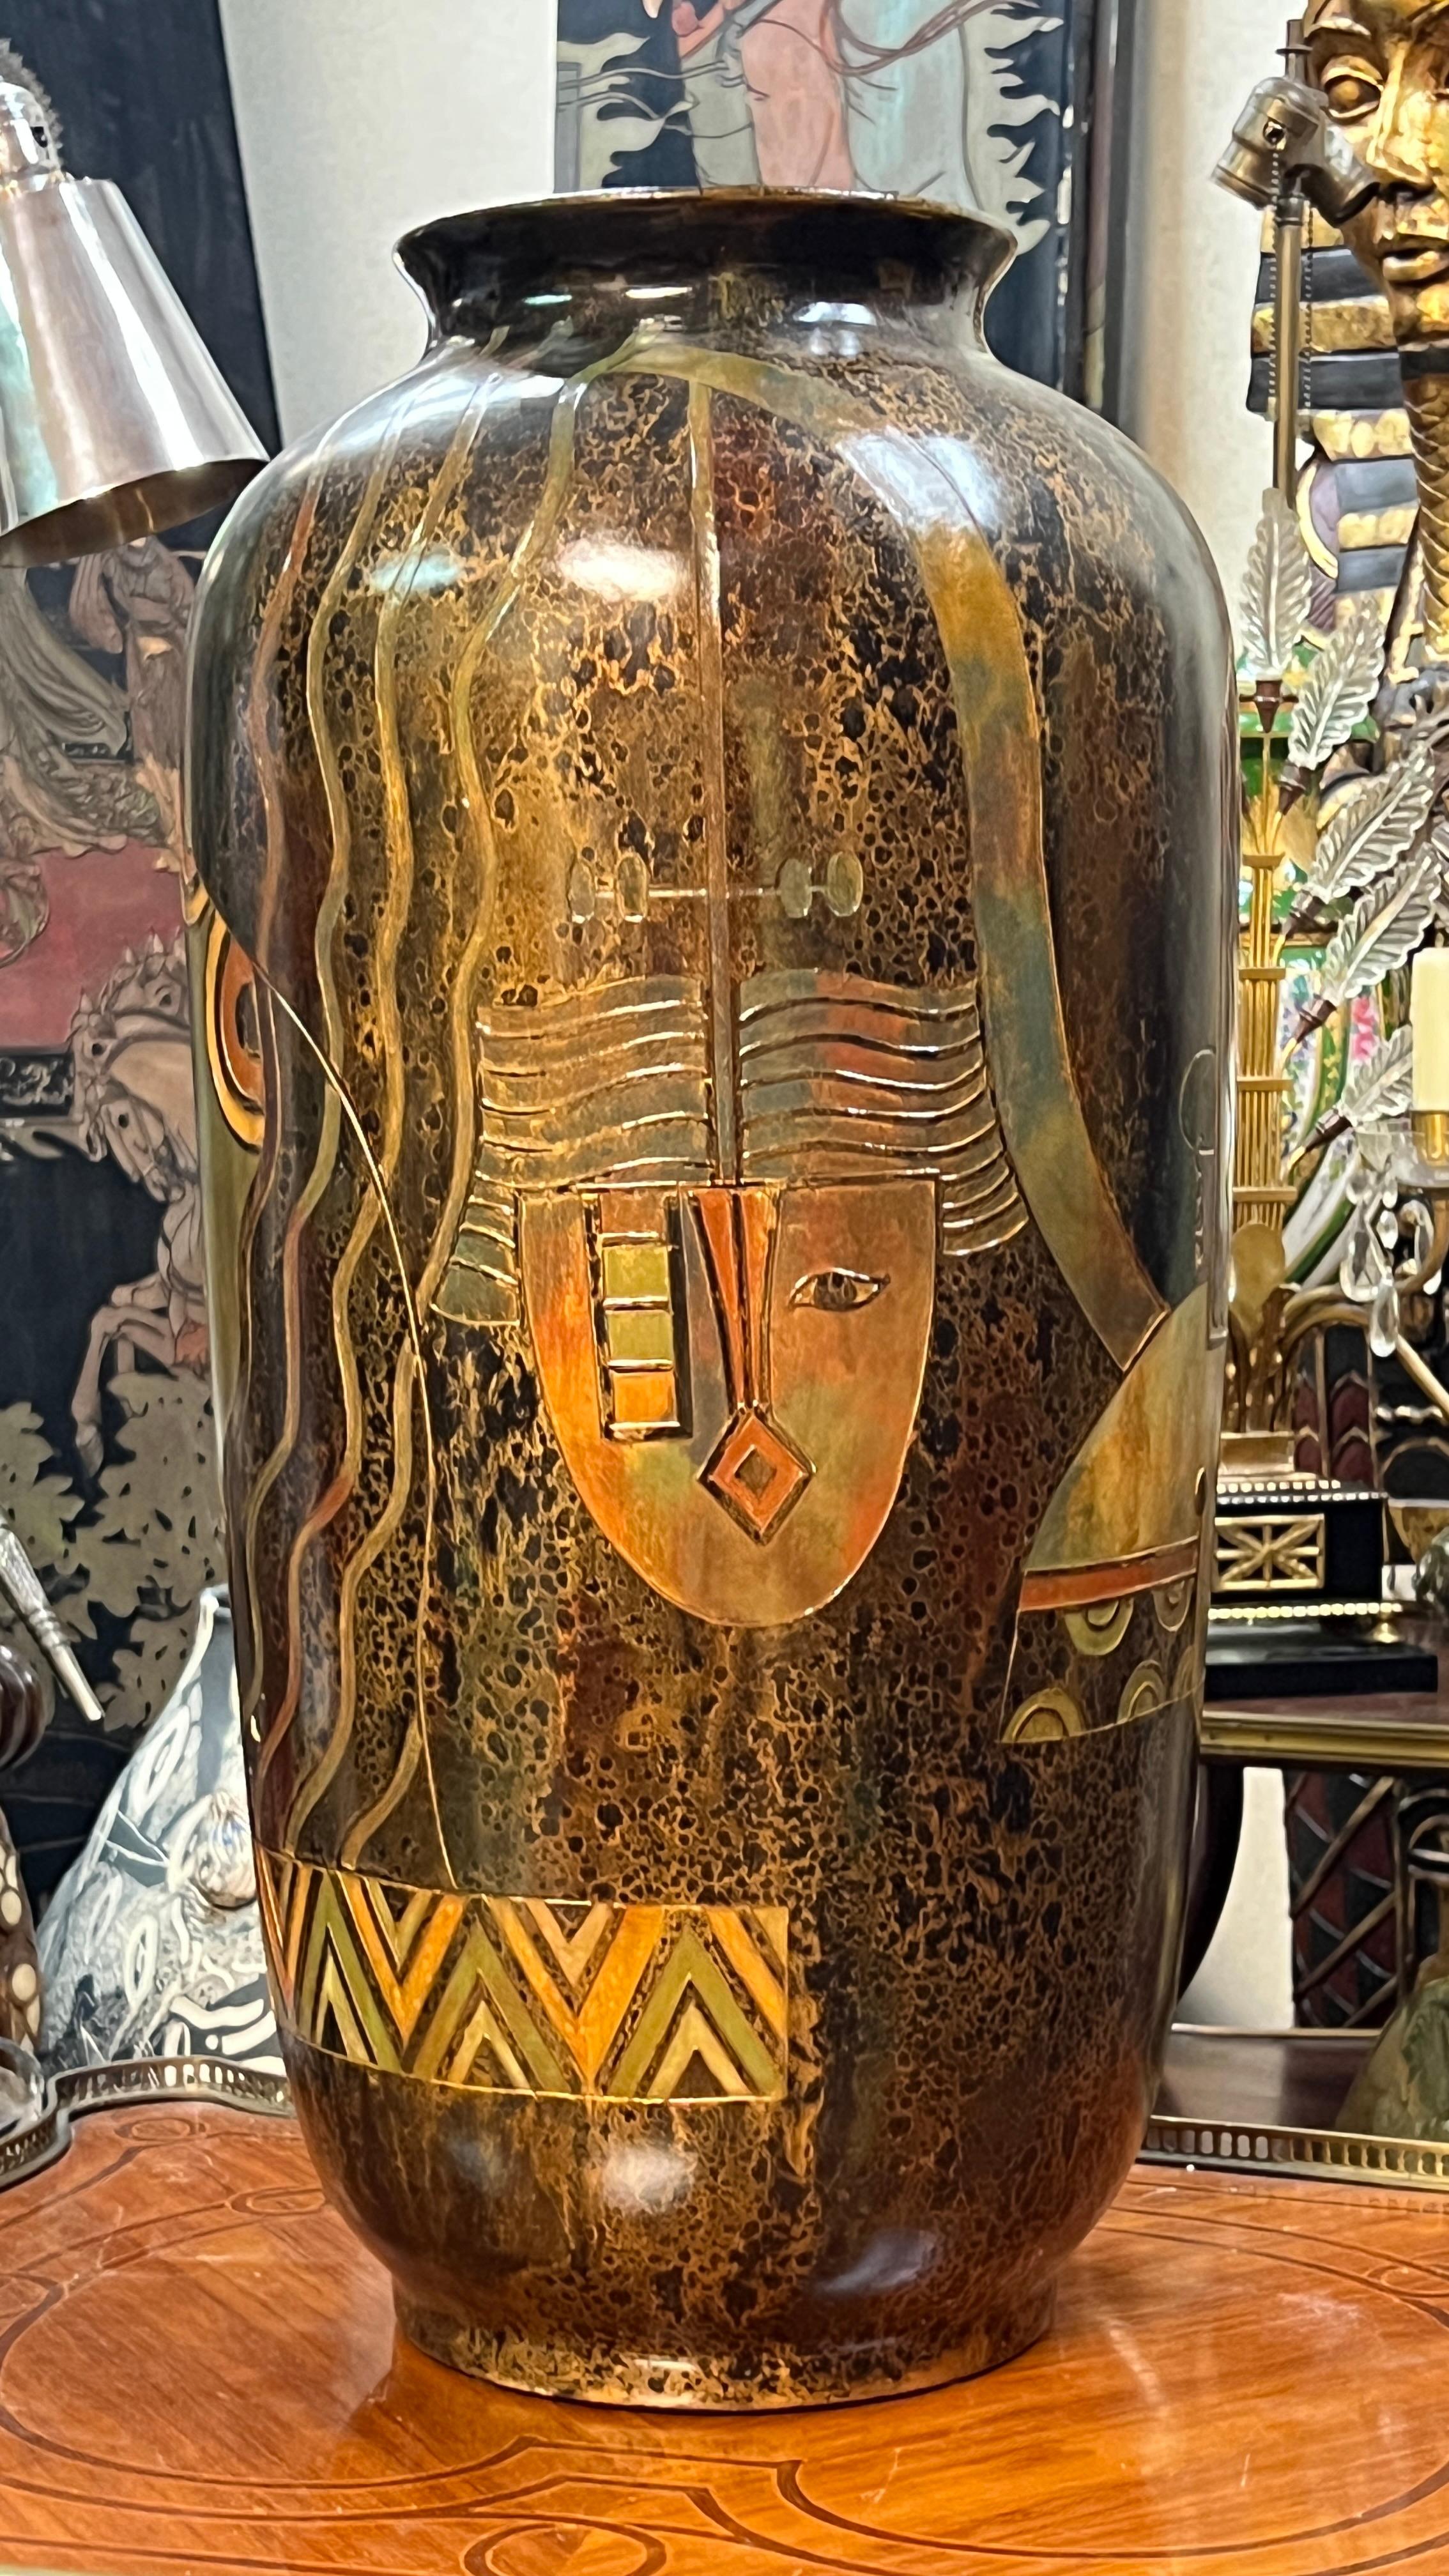 Pair of vintage, mid-century modern vases in the Art Deco style with mottled enameled finishes and incised stylized designs including masks, geometric motifs and floral bouquets.  